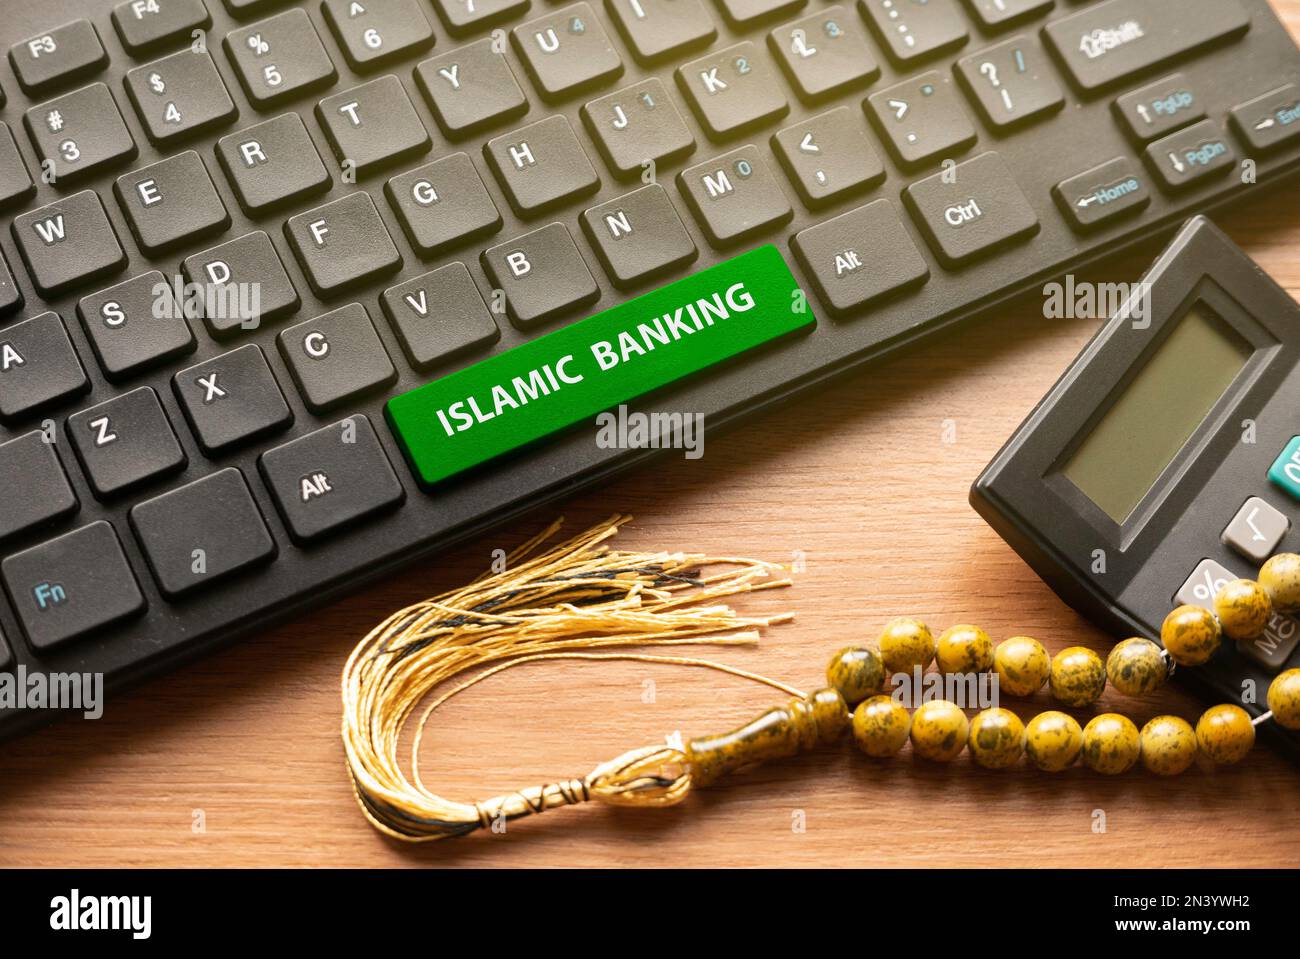 Calculator, rosary beads and computer keyboard with green button written with Islamic Banking. Stock Photo